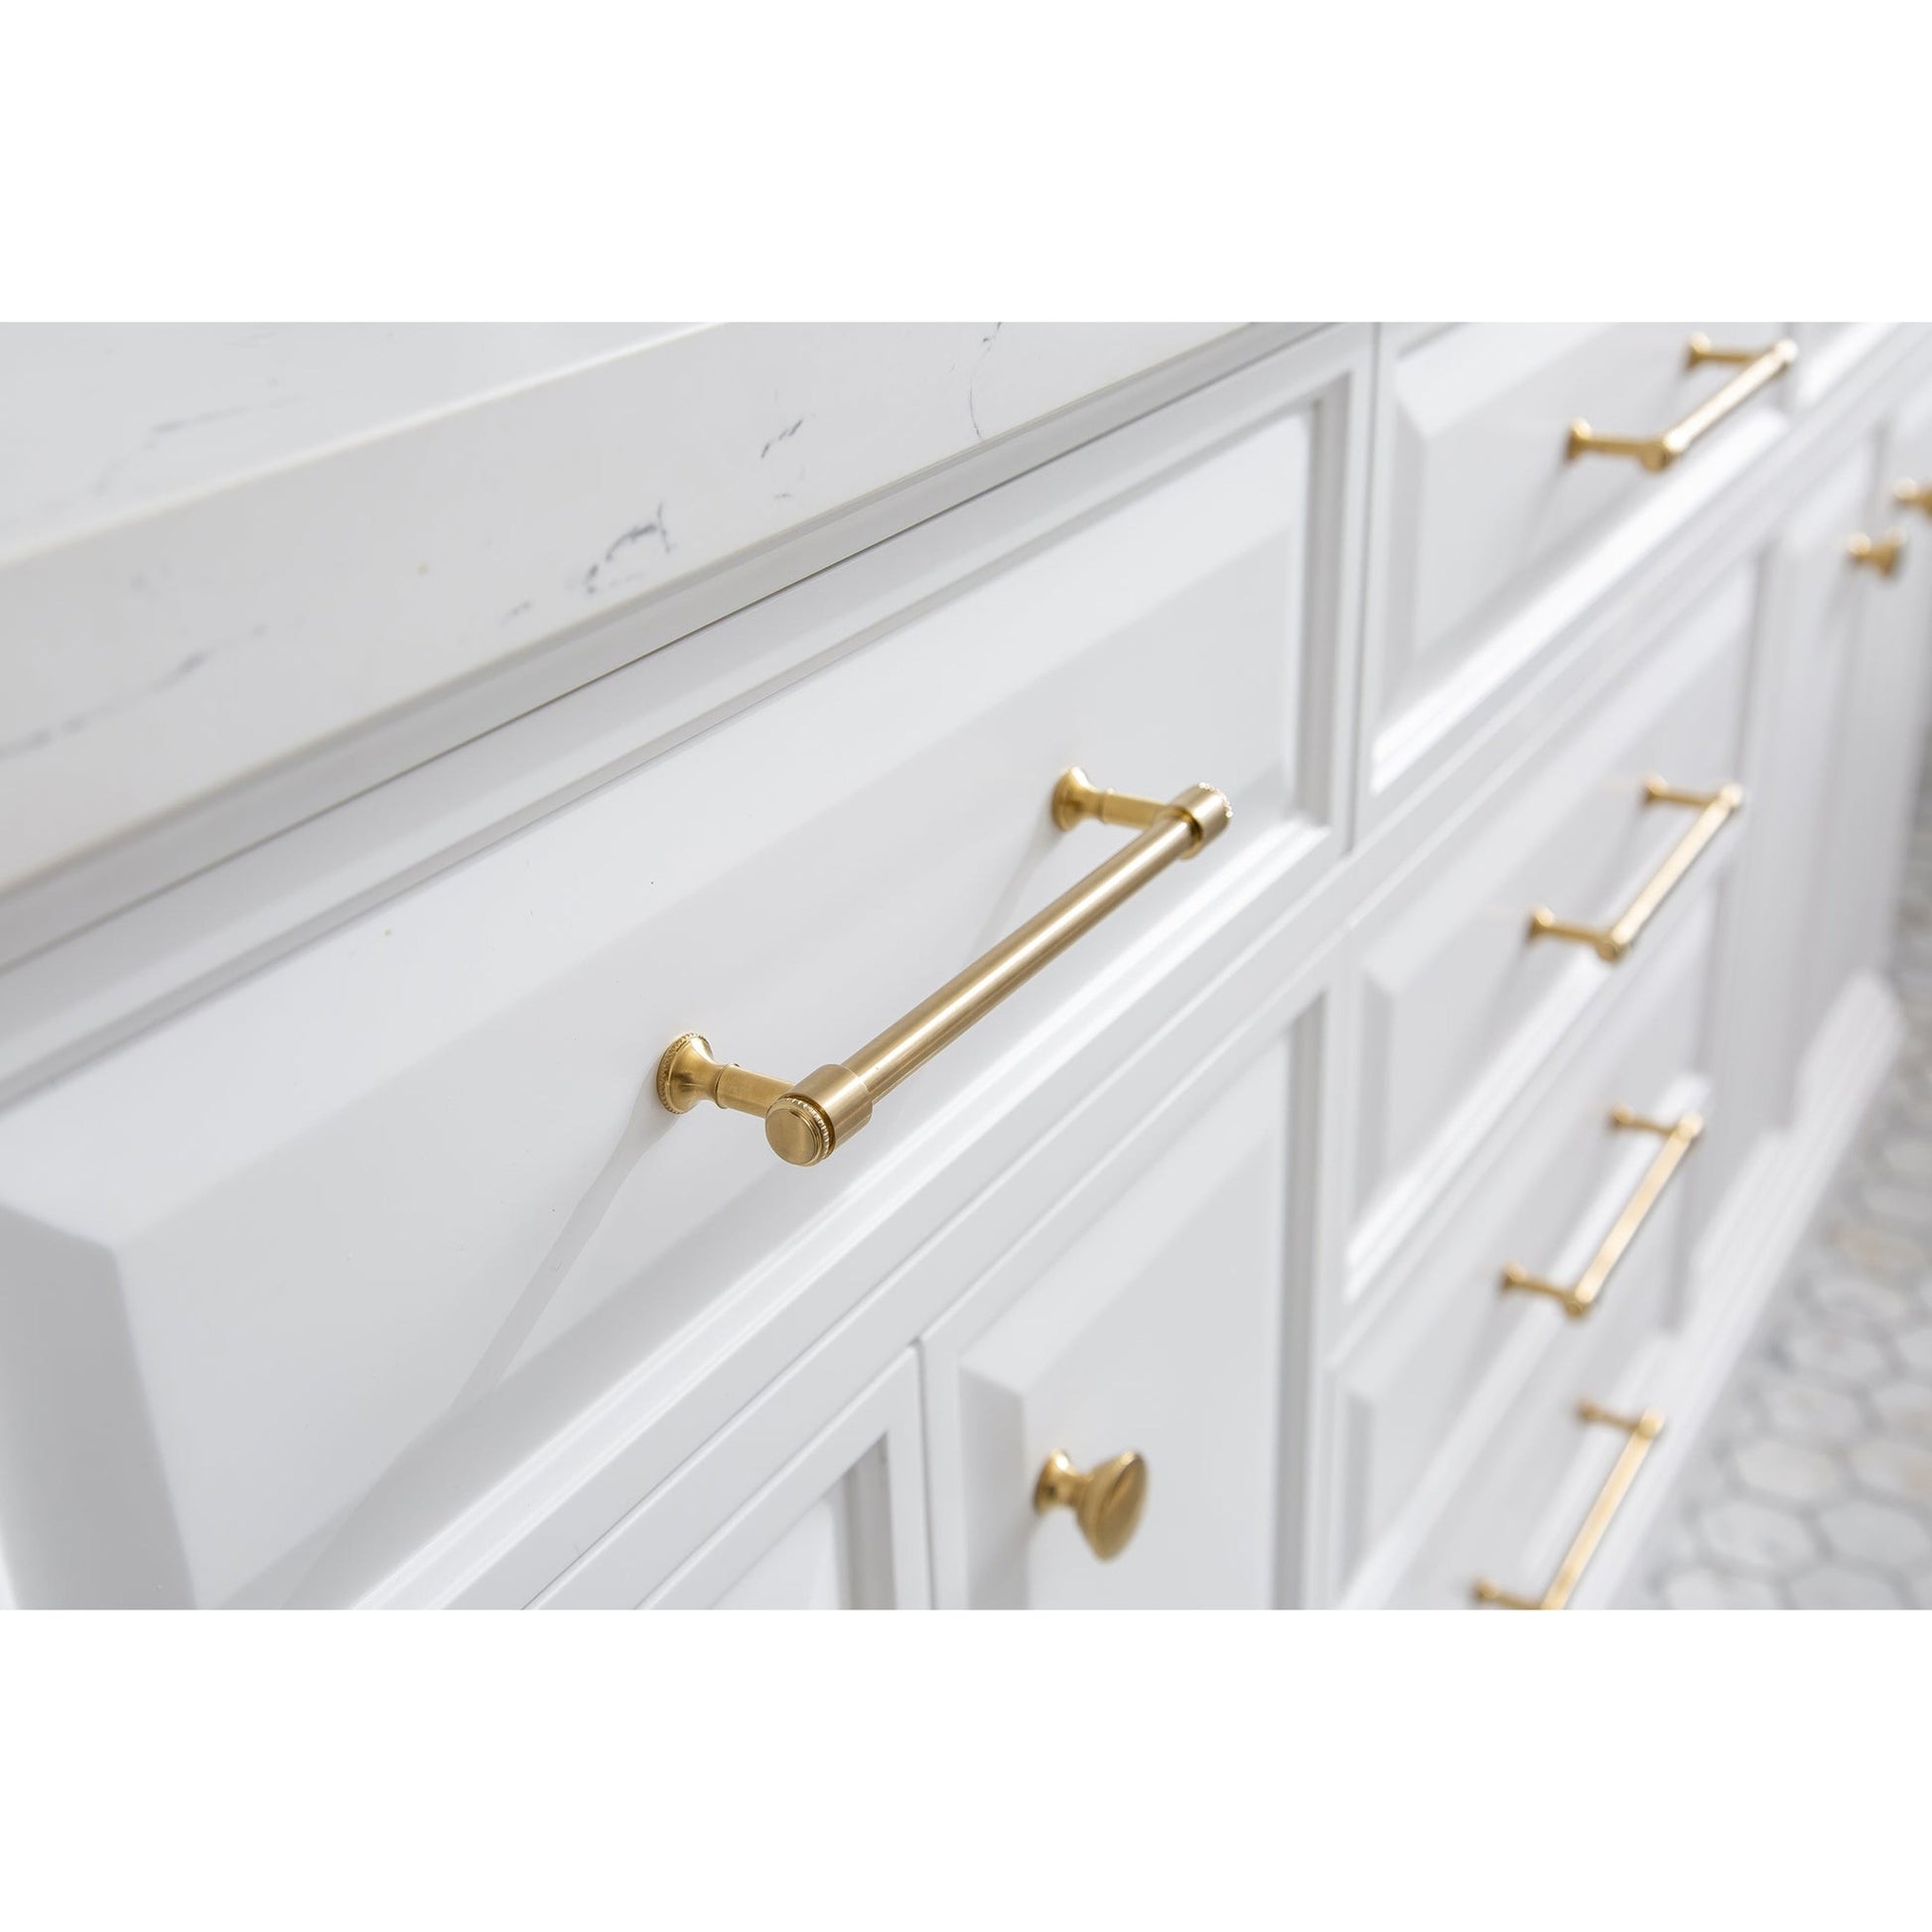 Water Creation Palace 72" Quartz Carrara Pure White Bathroom Vanity Set With Hardware in Satin Gold Finish And Mirrors in Chrome Finish